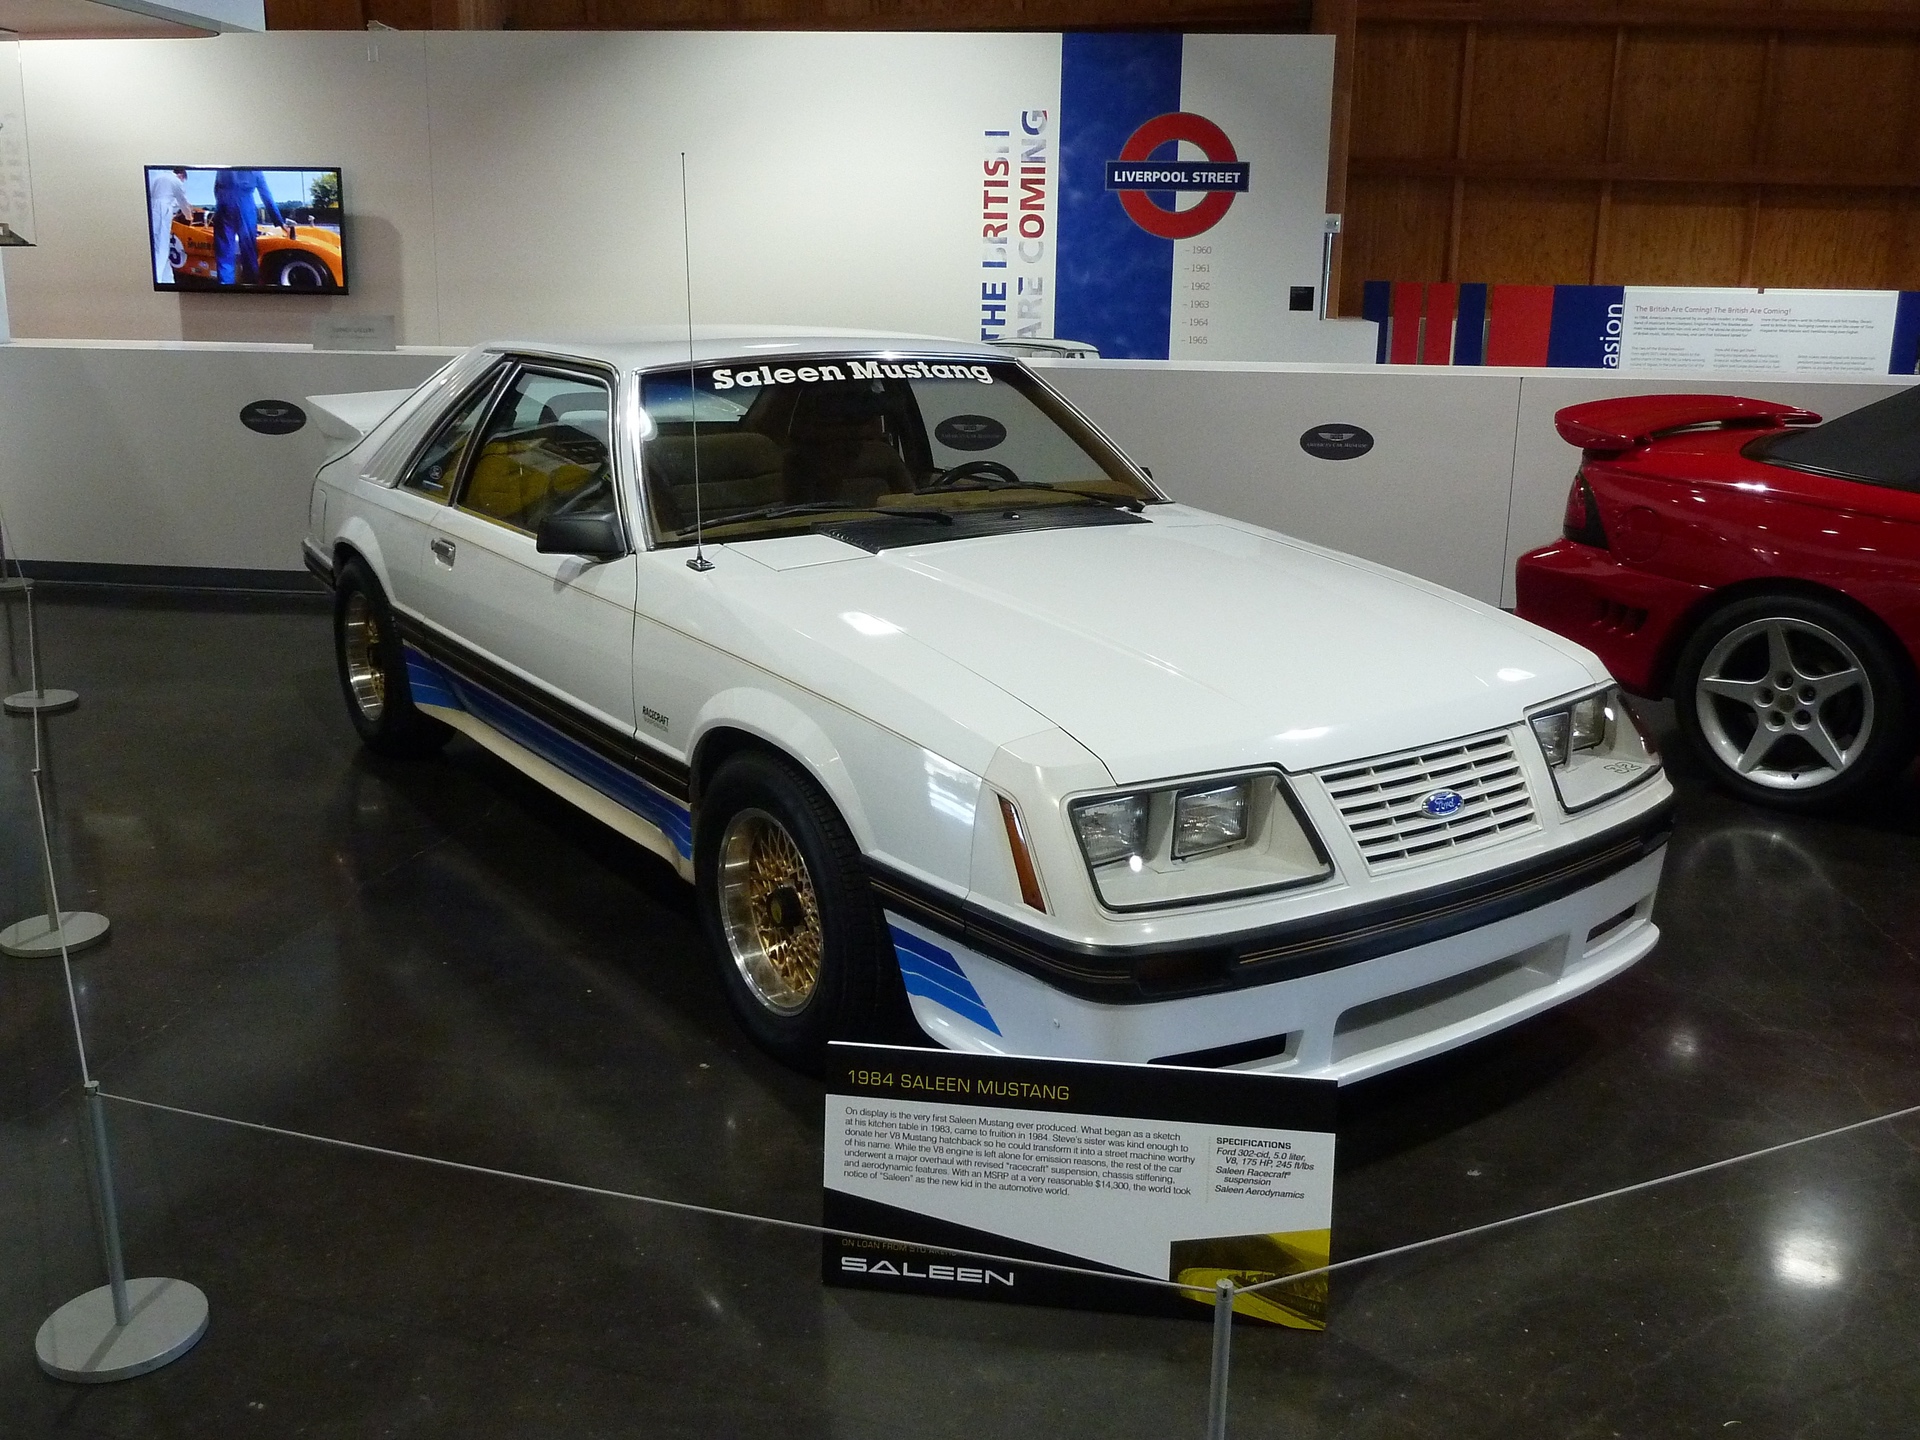 White Saleen Mustang from 1984 in museum